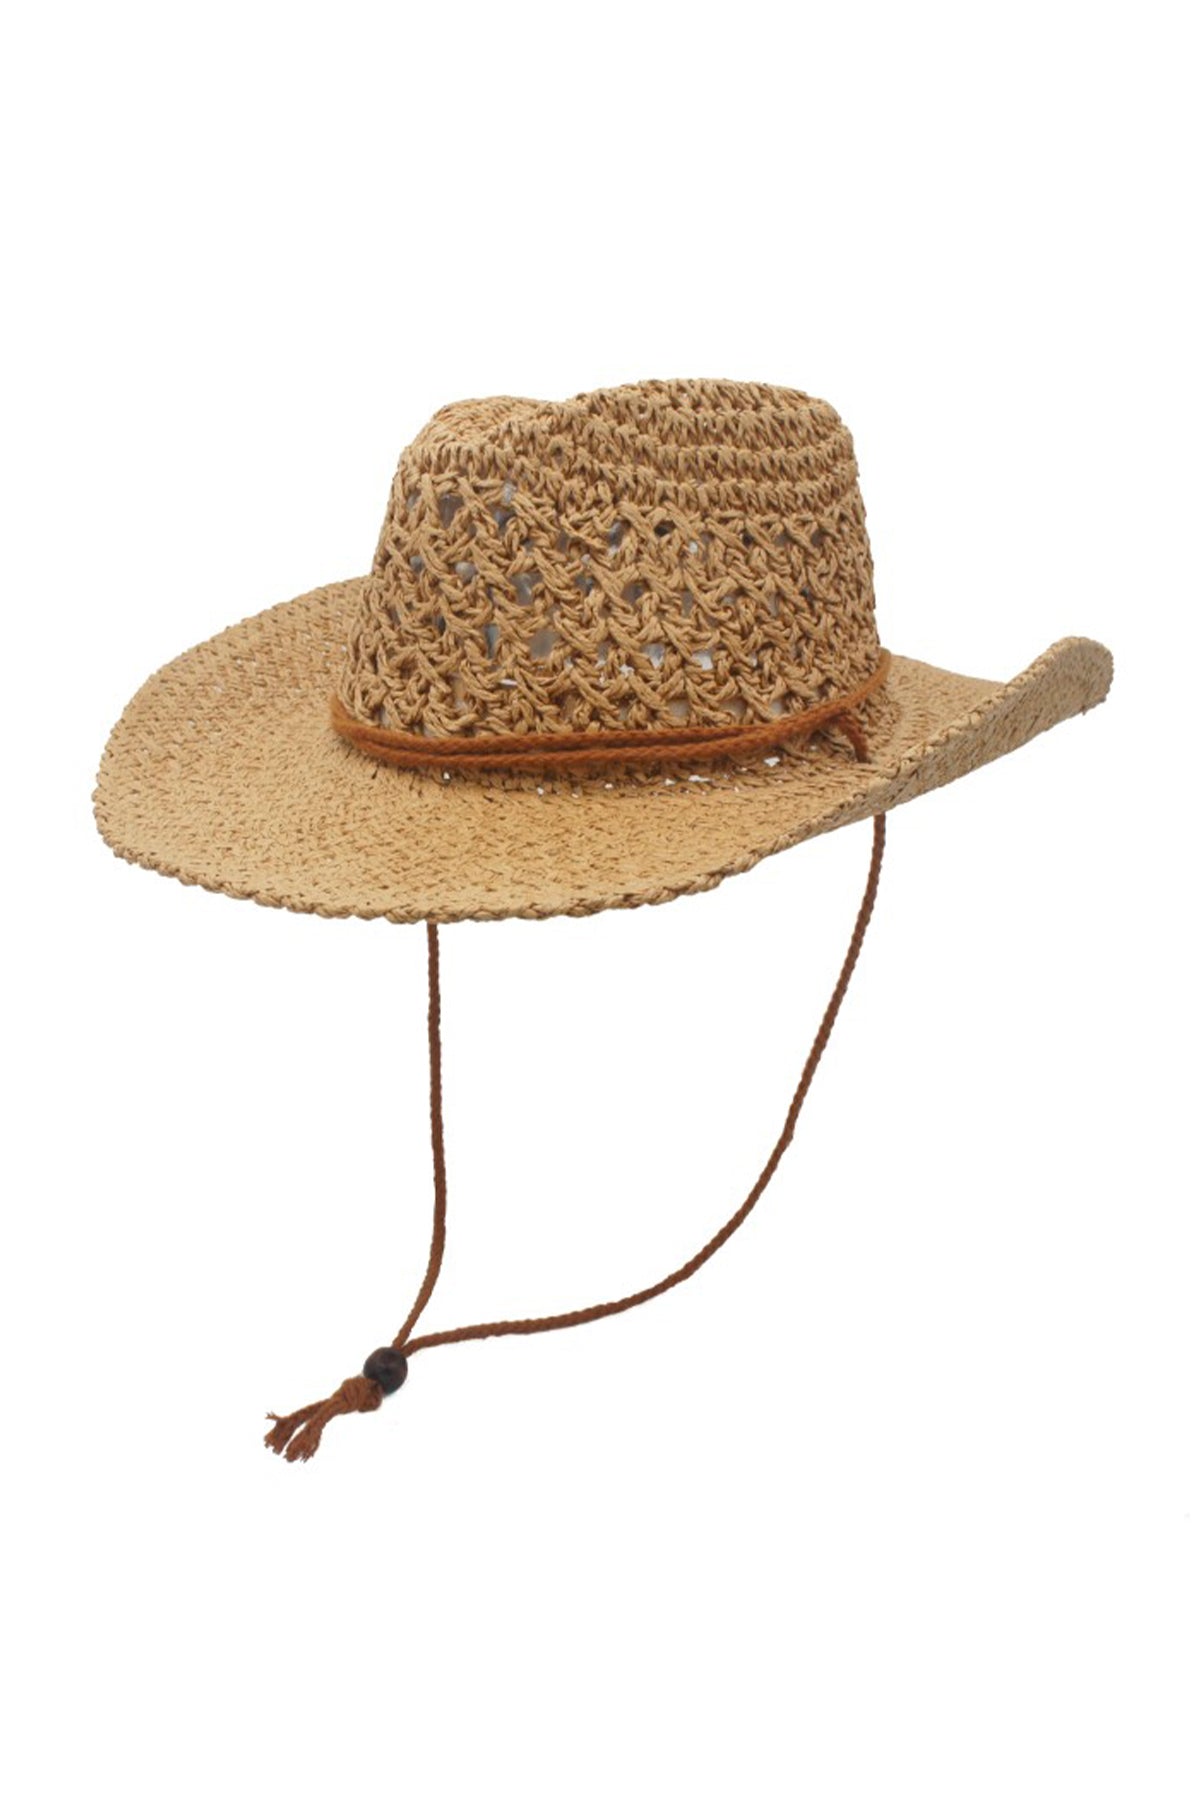 CROCHET WEAVE COWBOY FEDORA WITH STRAP